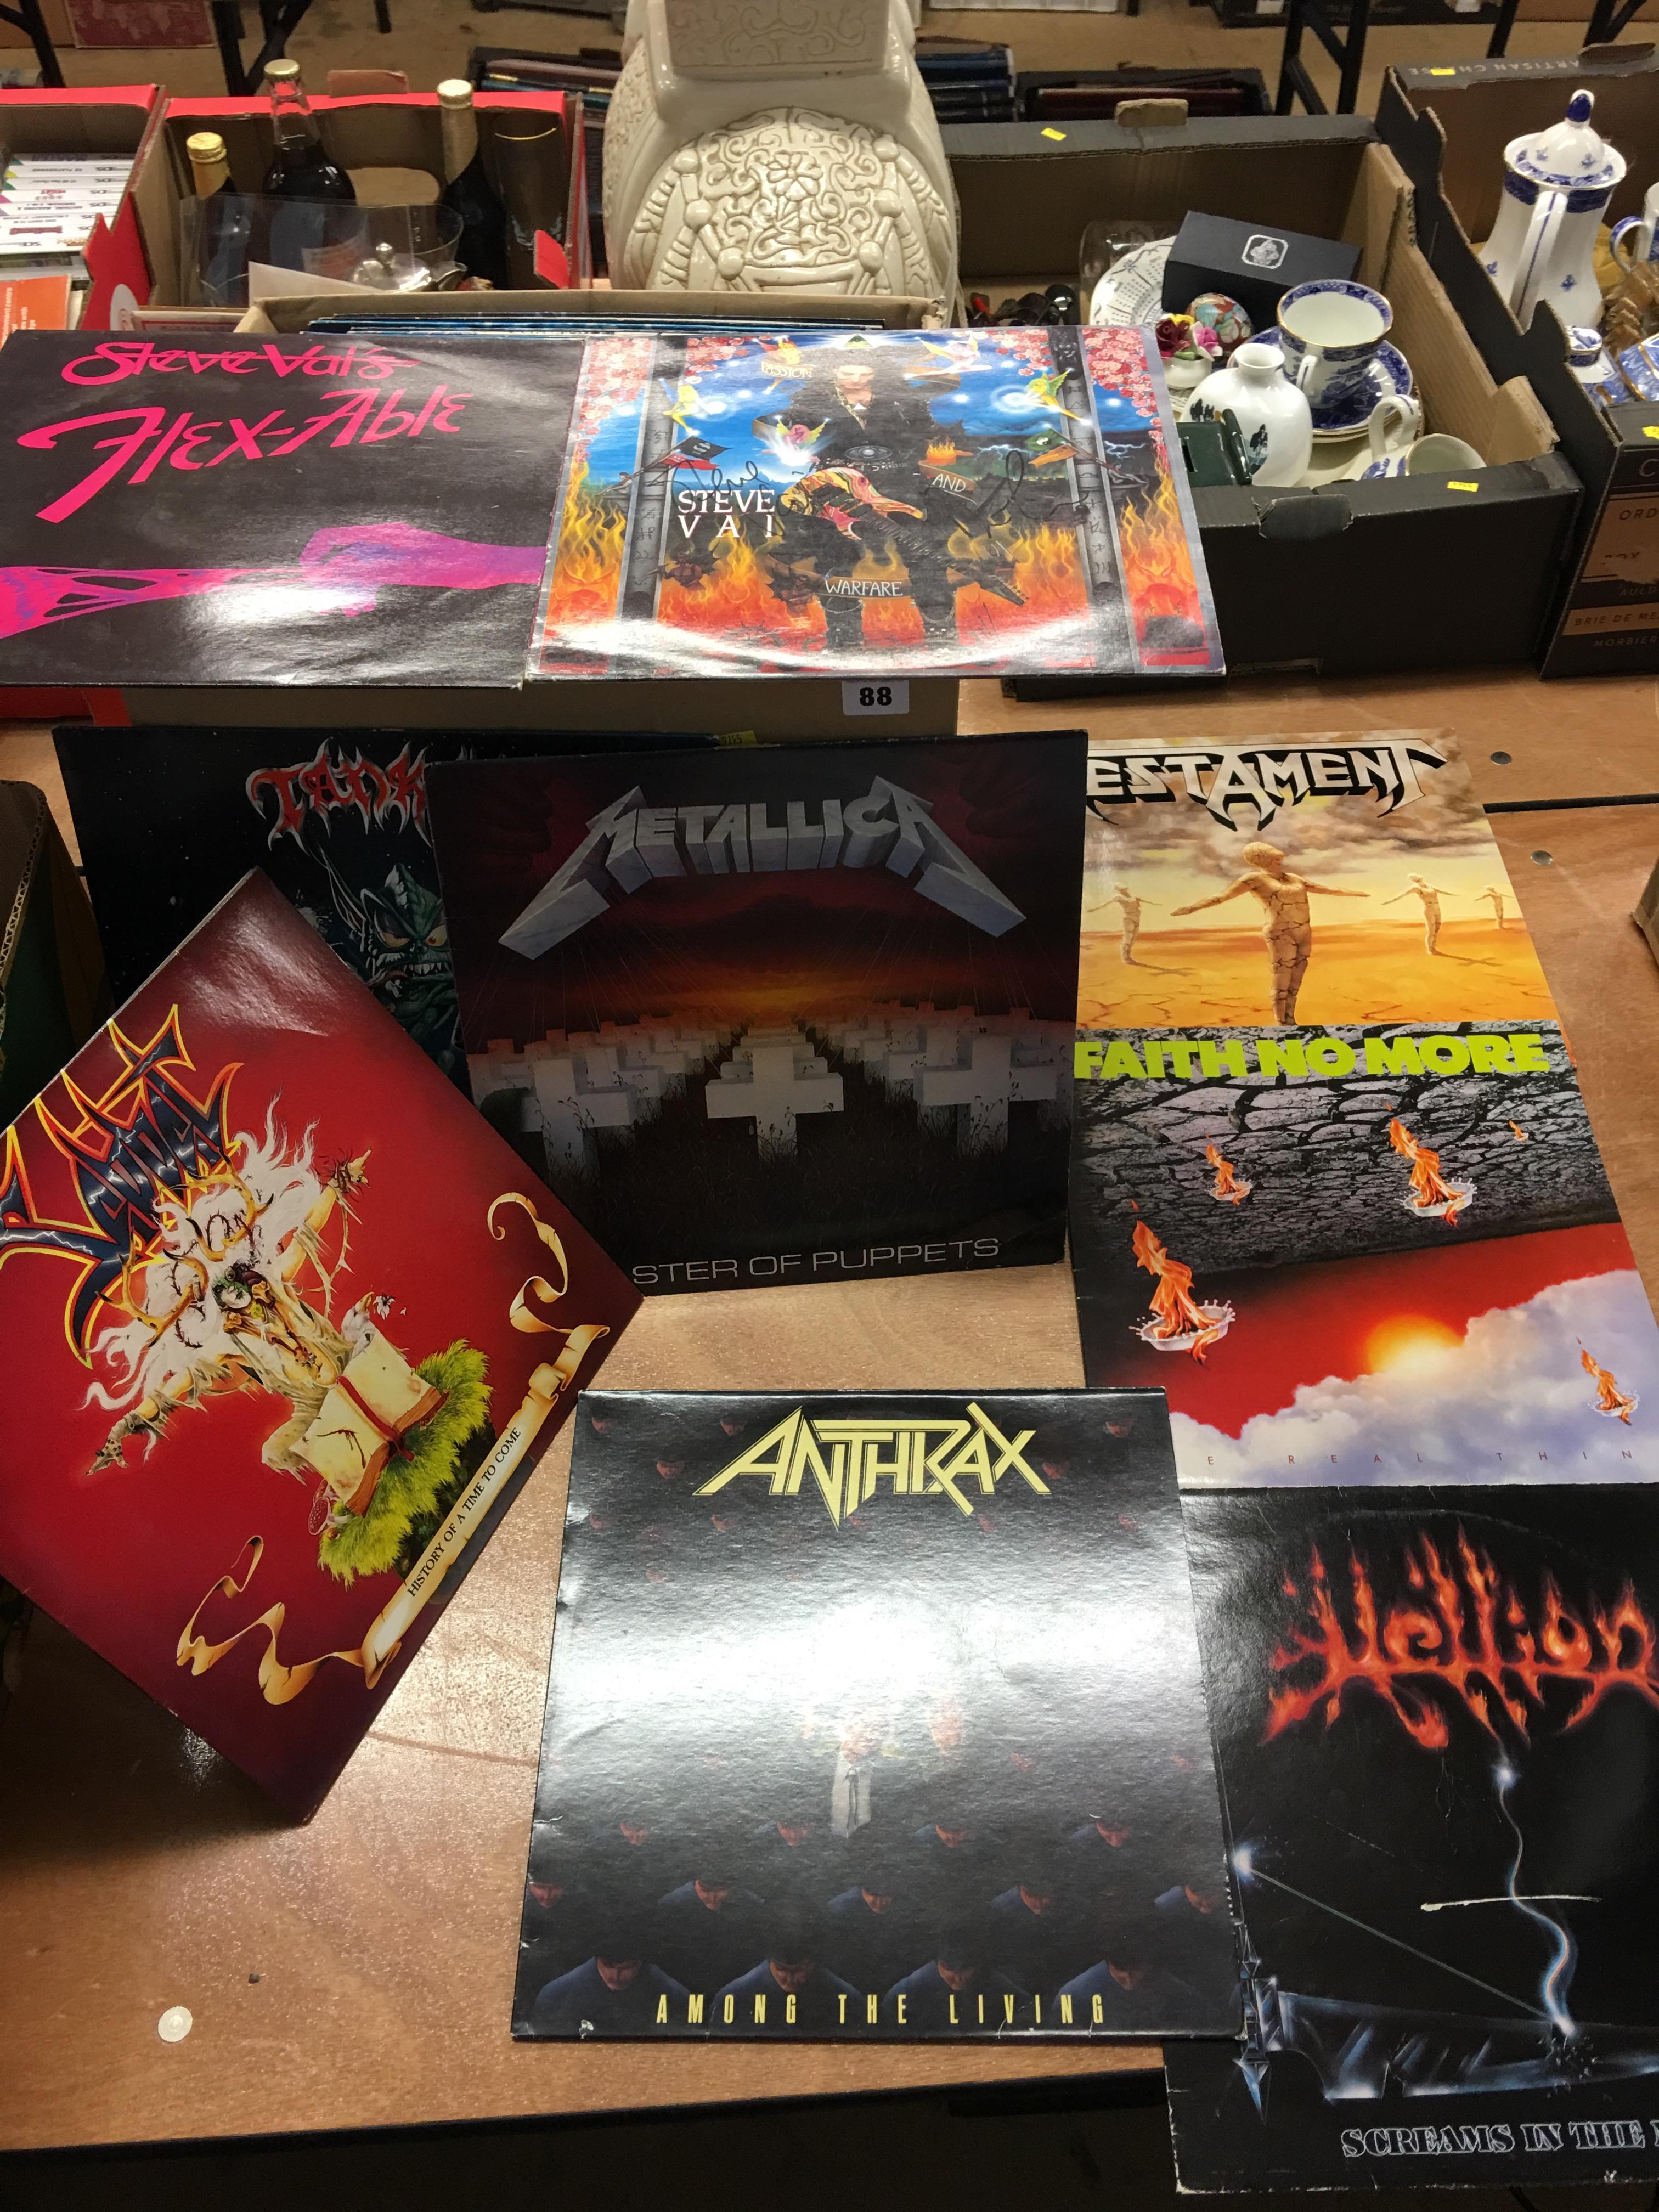 A box of heavy metal vinyl records, including a signed 'Steve Vai' album - Image 3 of 12